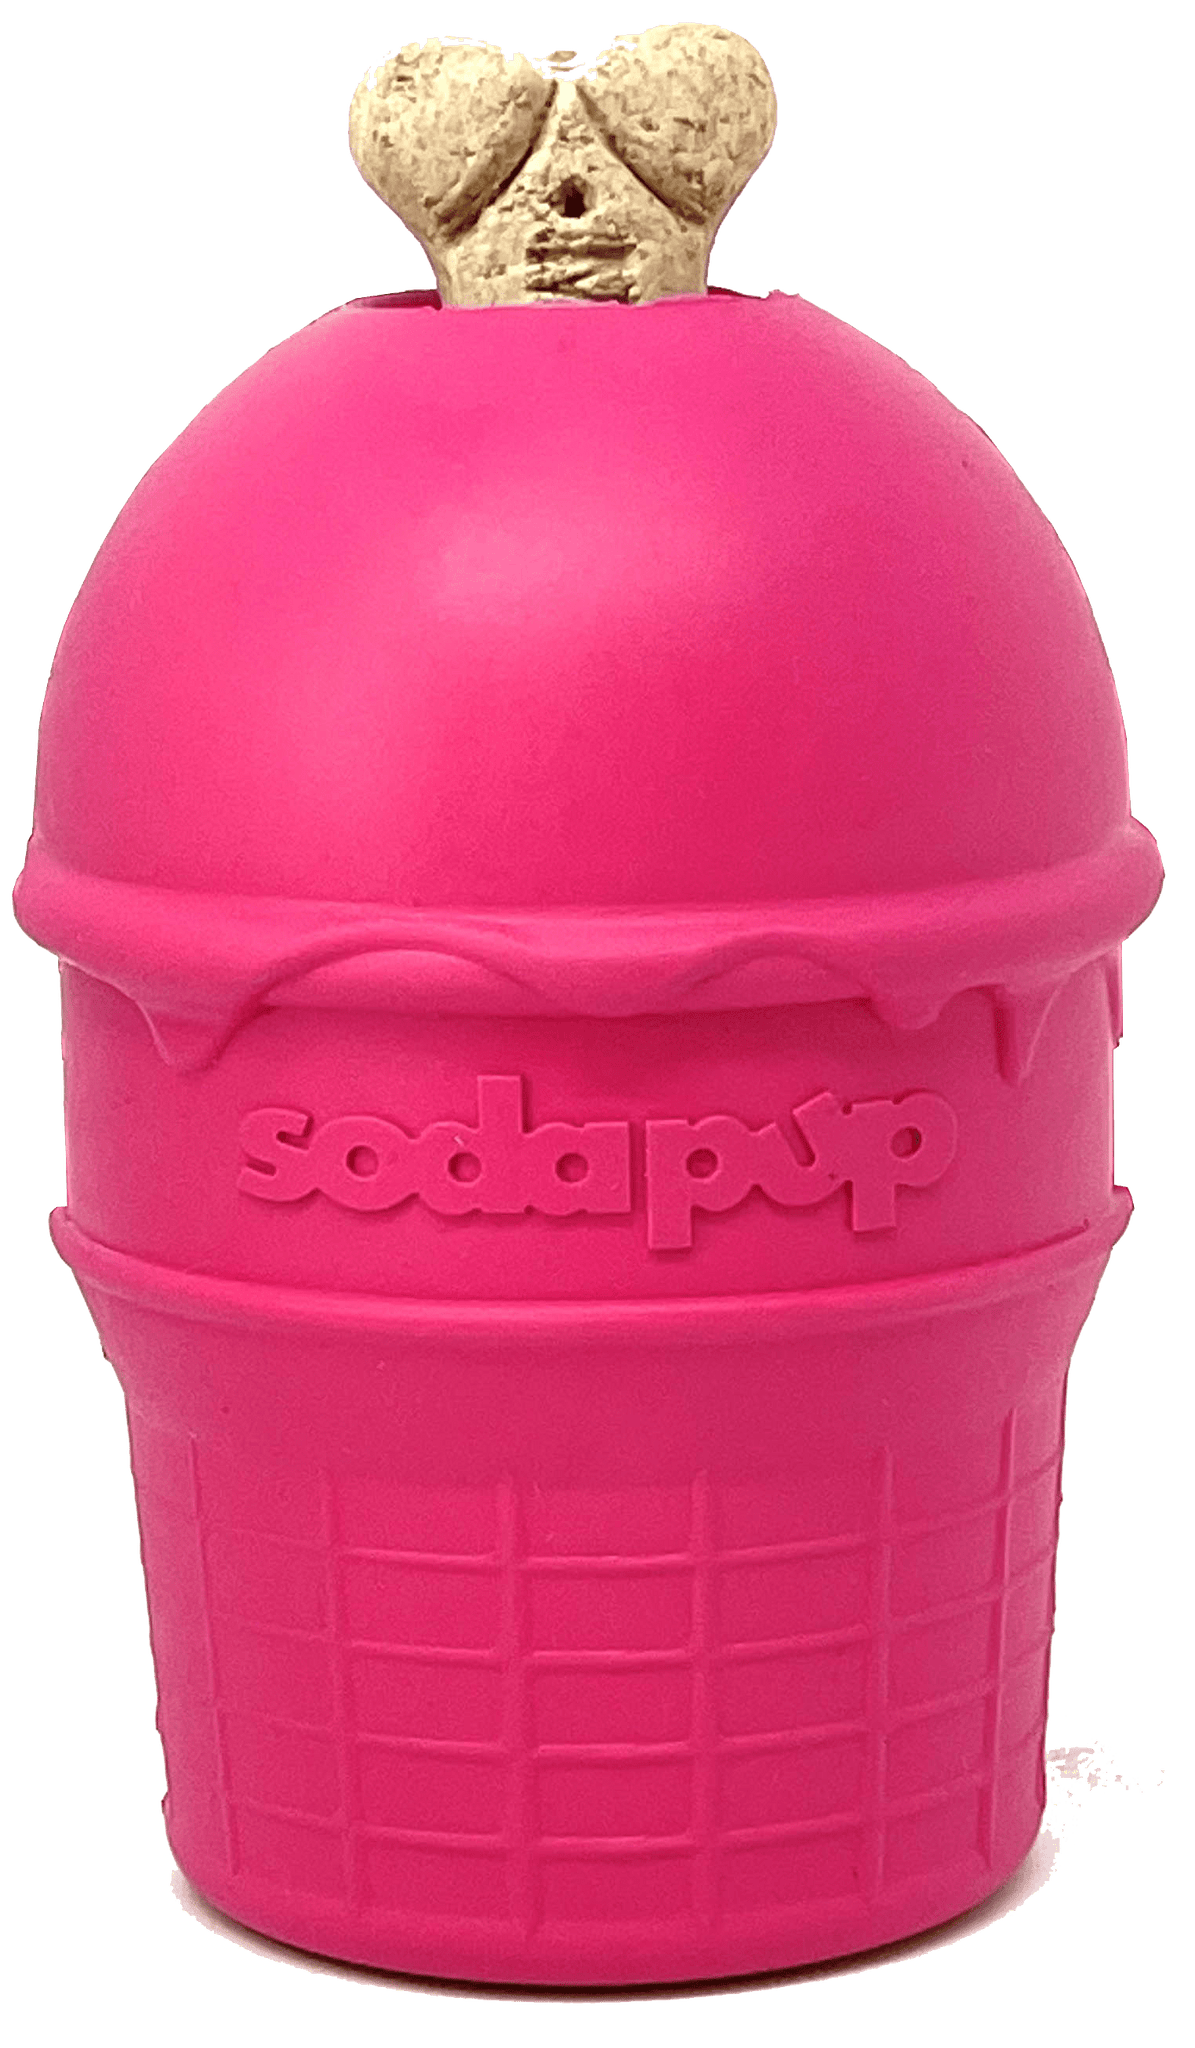 https://sodapup.com/cdn/shop/products/sodapup-dog-toys-new-sp-ice-cream-cone-durable-rubber-chew-toy-and-treat-dispenser-29336189829254_1024x1024@2x.png?v=1637051841